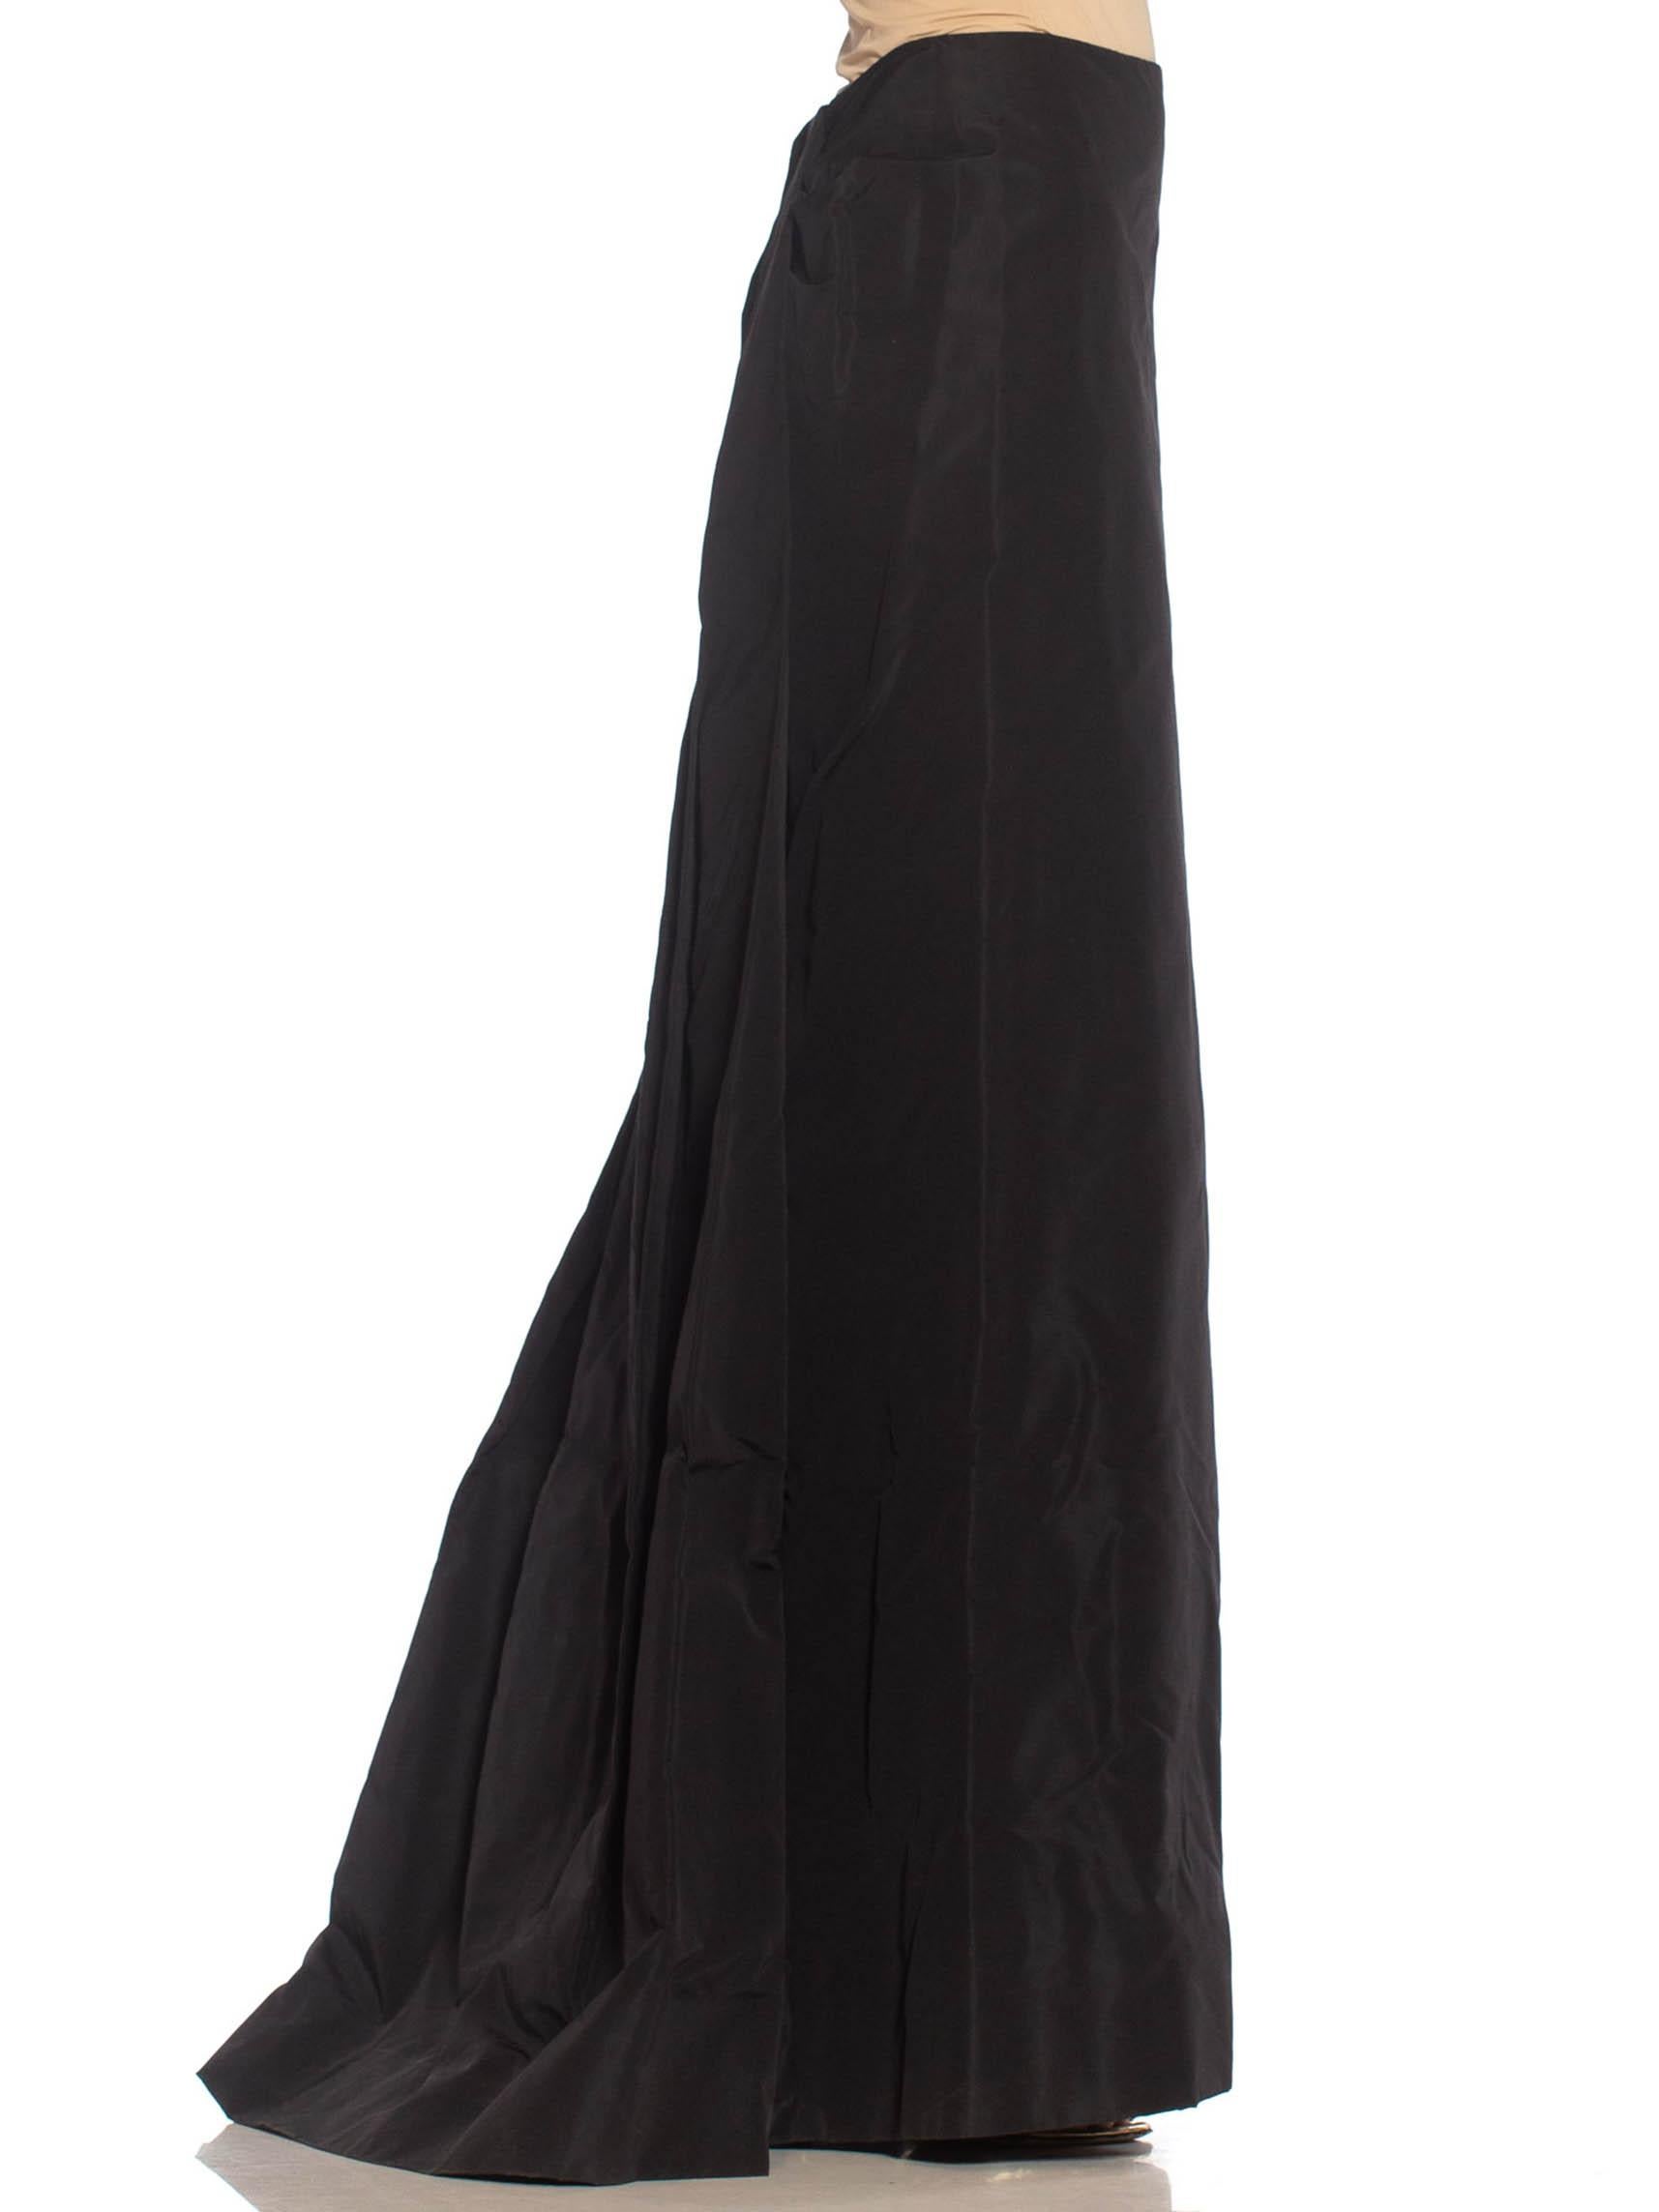 1990S MICHAEL KORS Black Silk Taffeta Trained Evening Skirt NWT In Excellent Condition For Sale In New York, NY